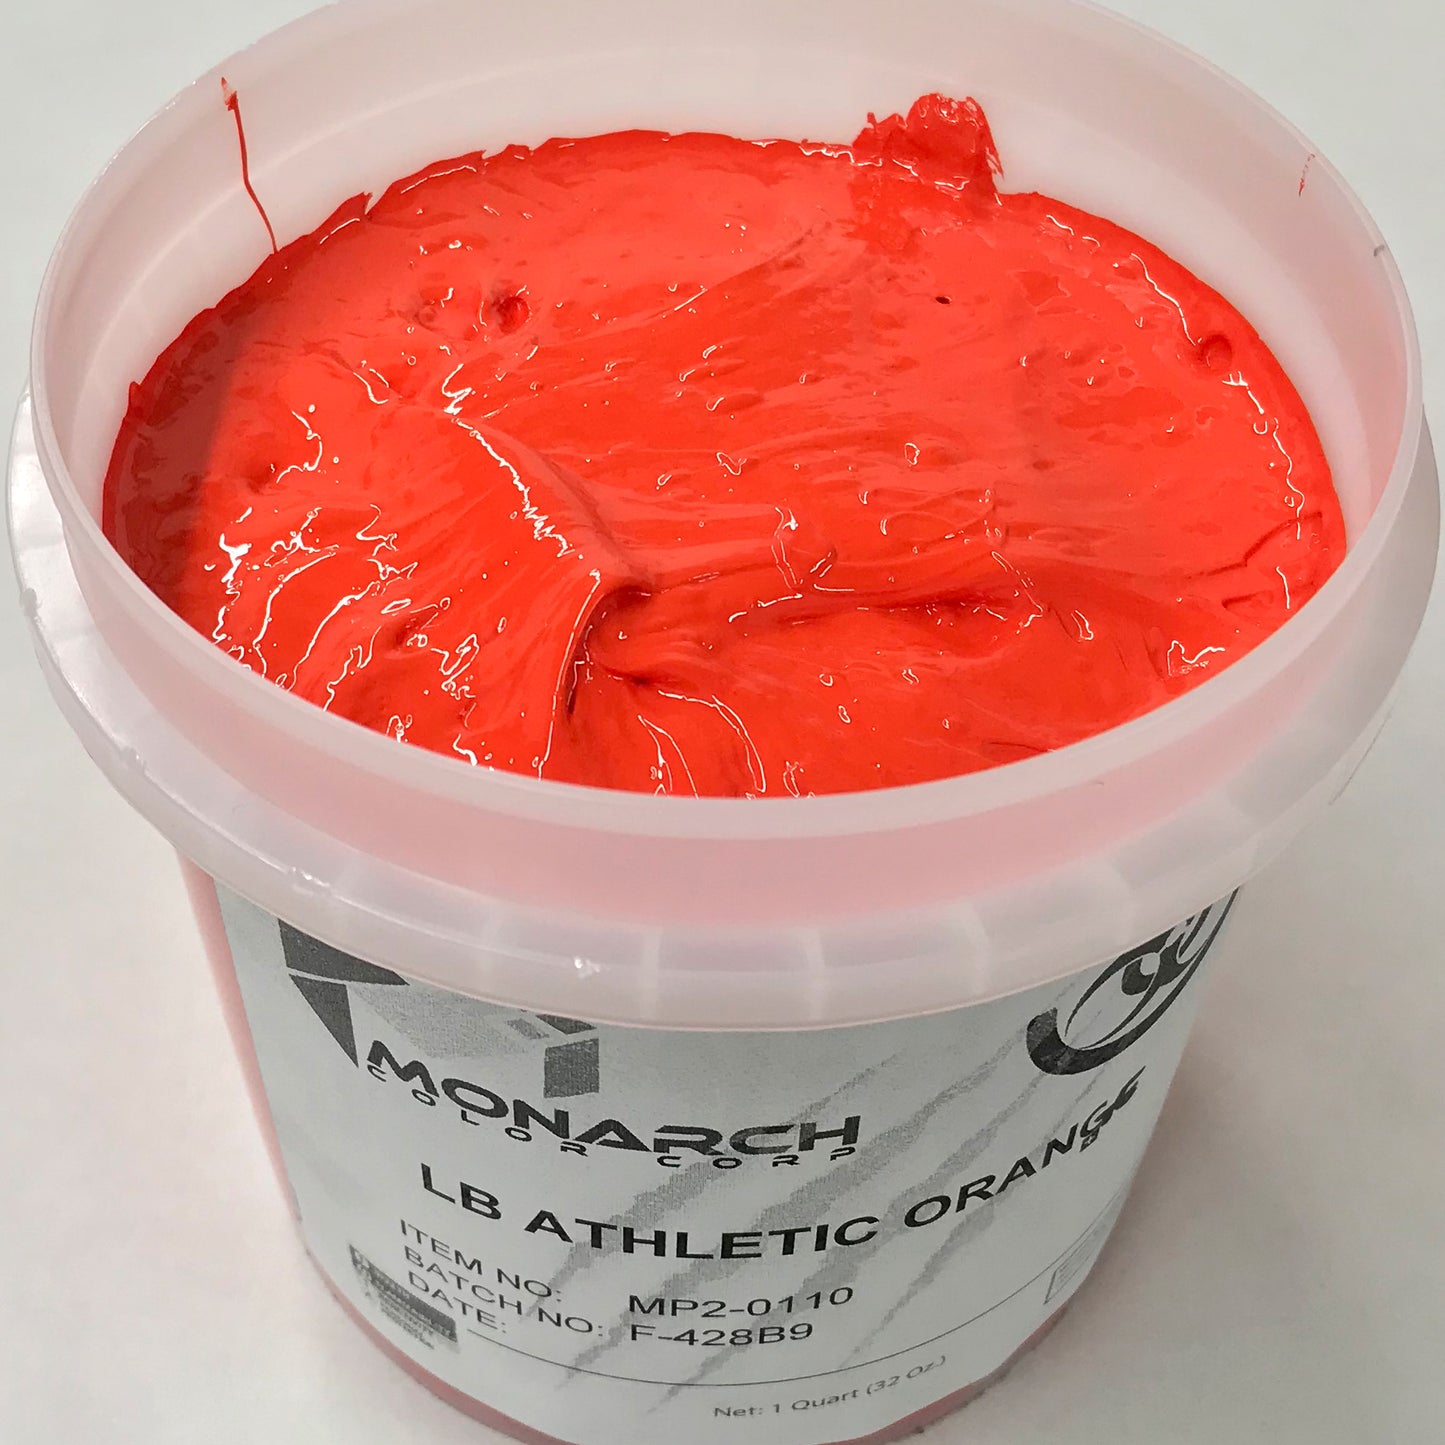 Monarch Plastisol Screen Printing Inks Low Temp Poly / Poly Blend Athletic Orange